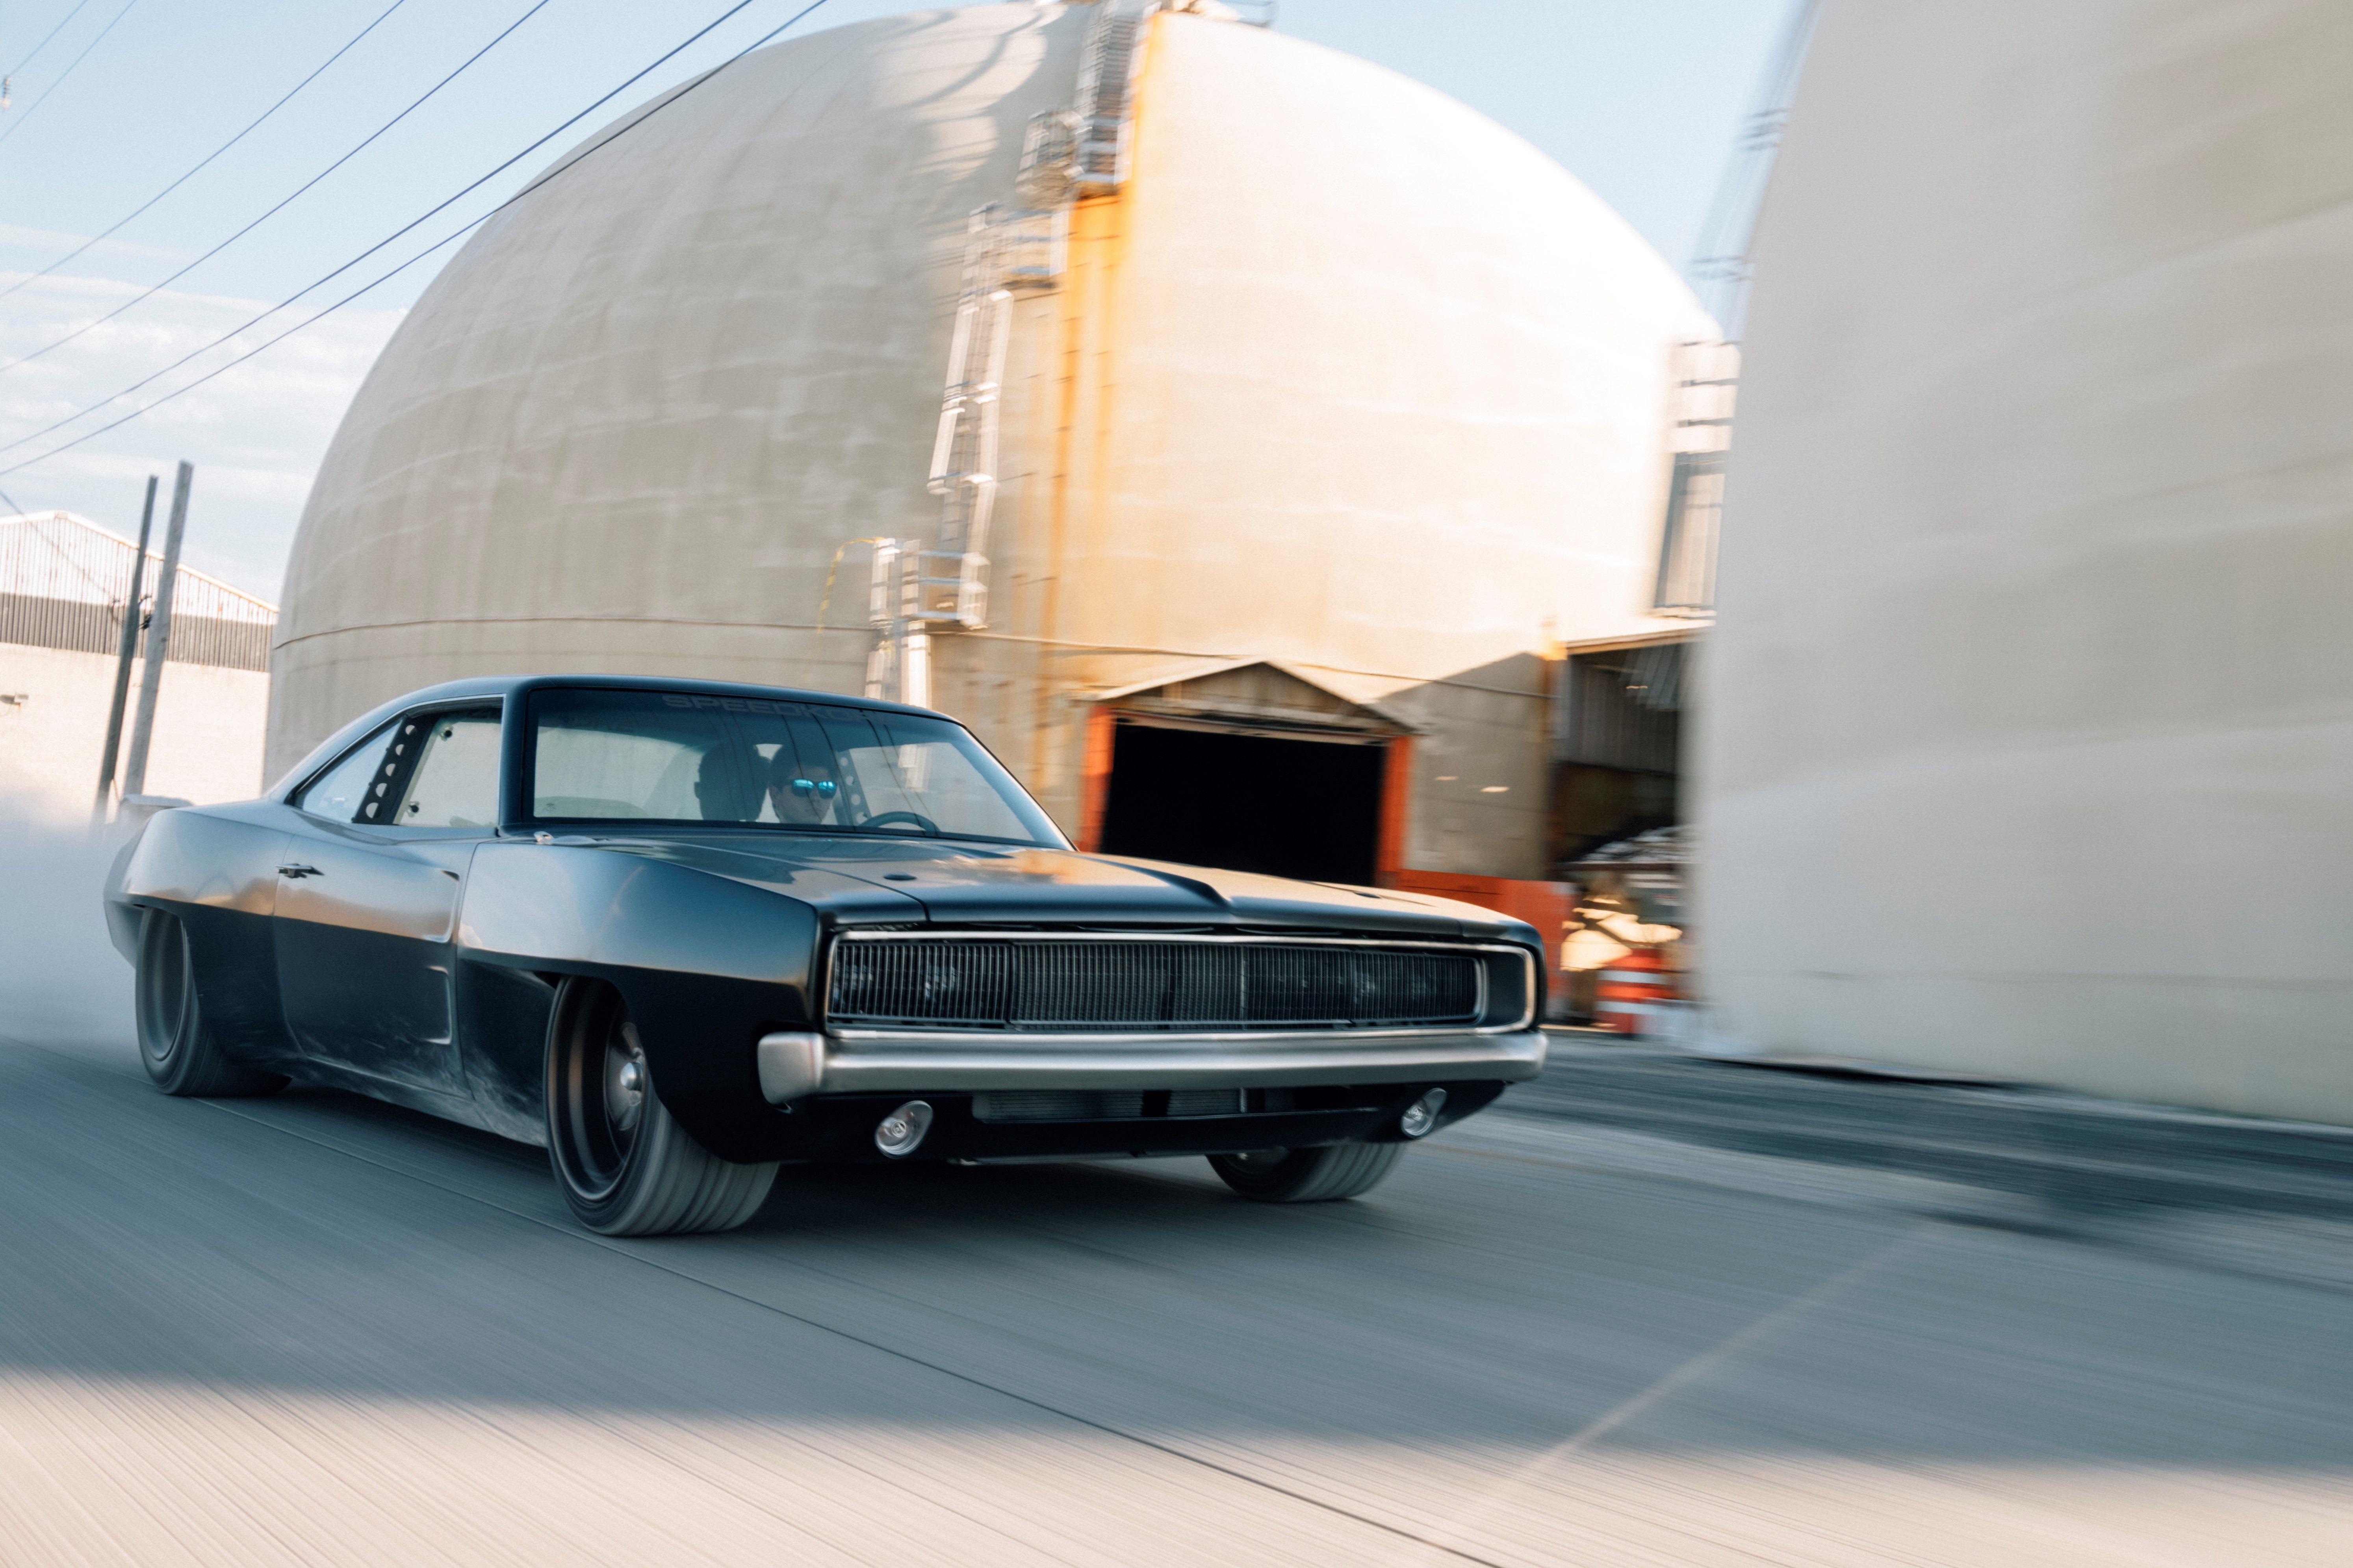 This Mid Engine 1968 Dodge Charger is Hellacious